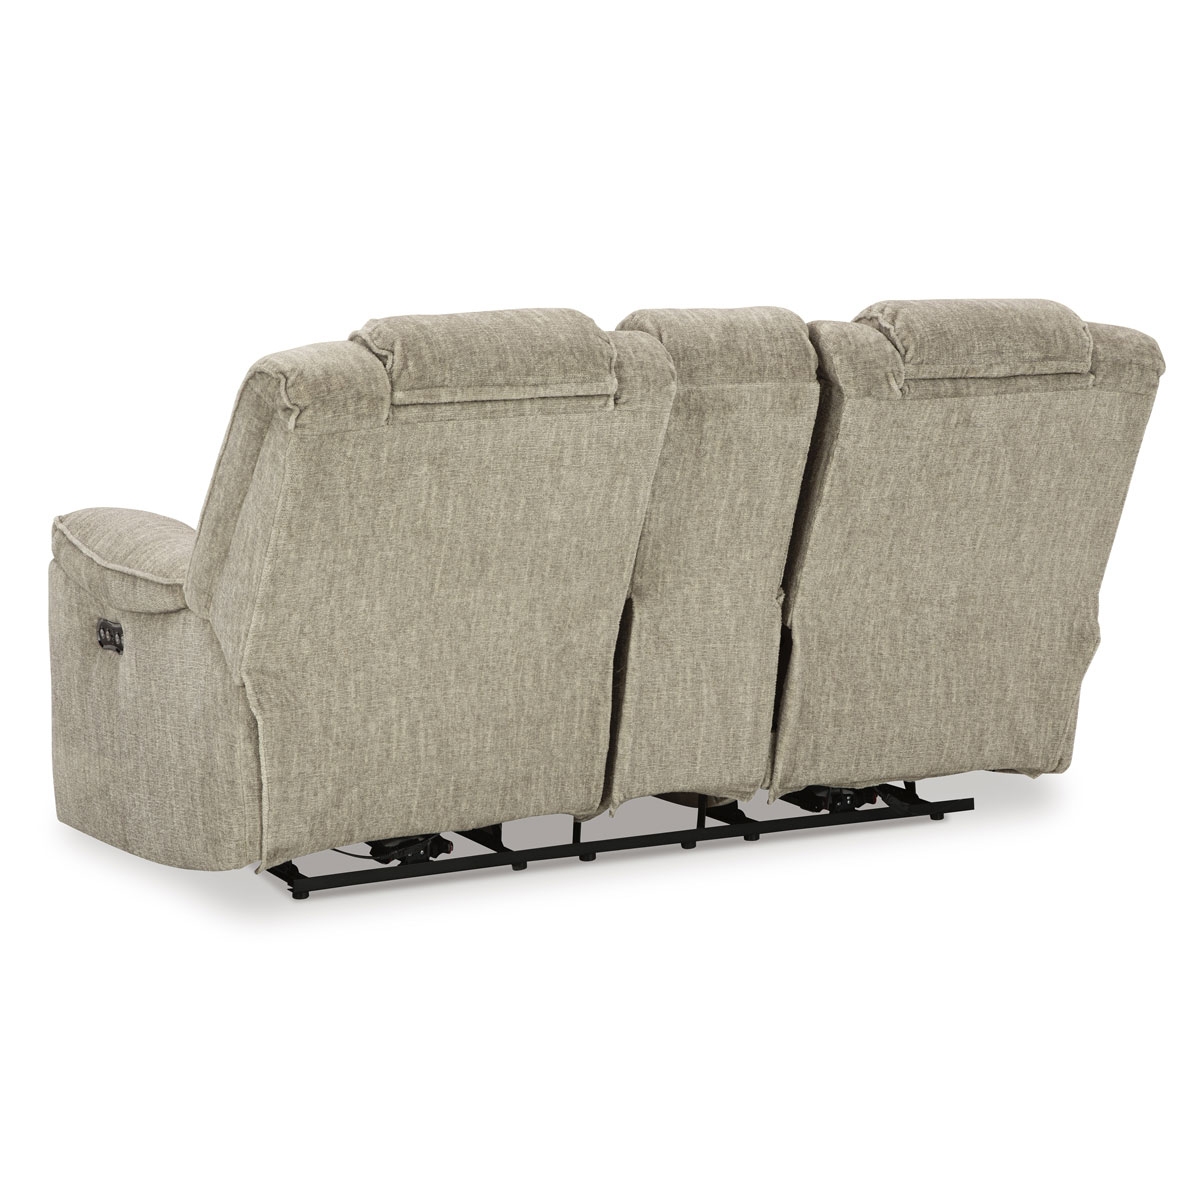 Picture of MATEO CONSOLE LOVESEAT WITH POWER HEADREST